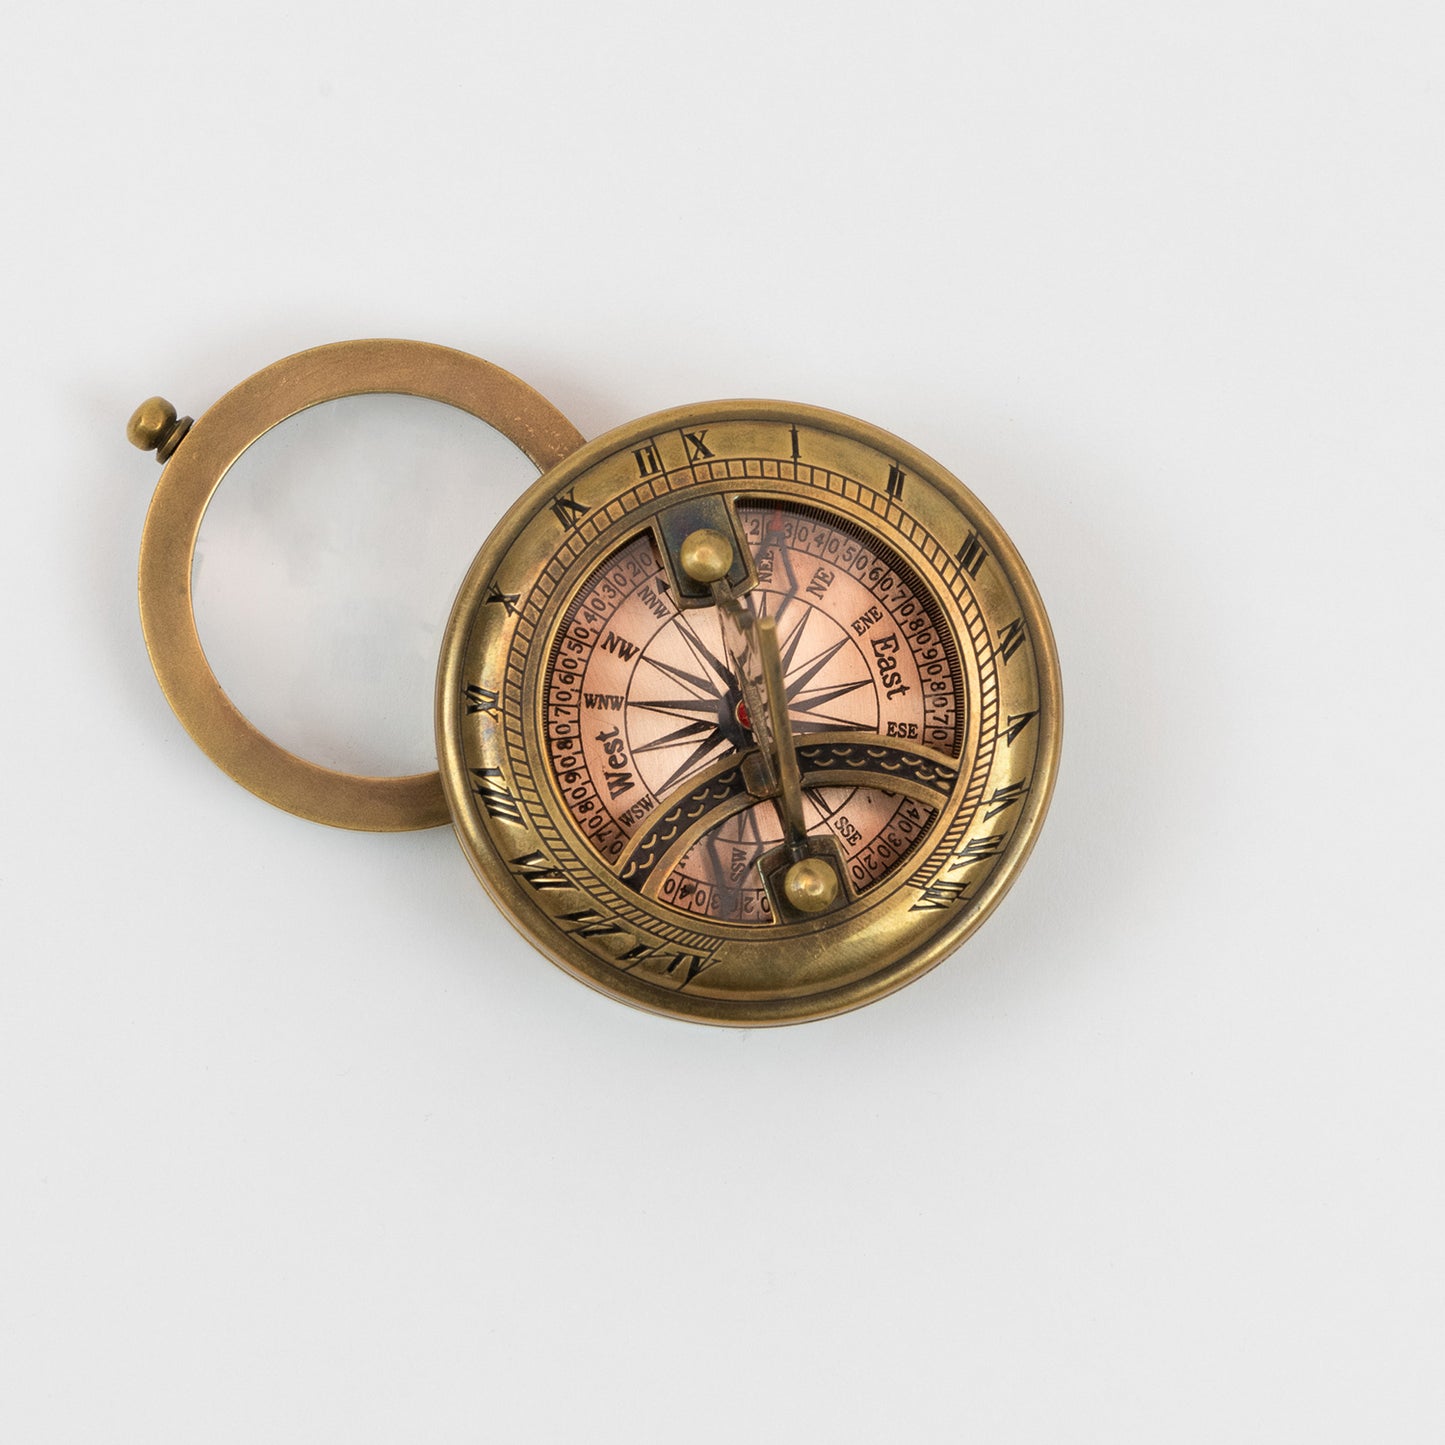 A brass sundial, compass and magnifier chart weight pictured on a white background.